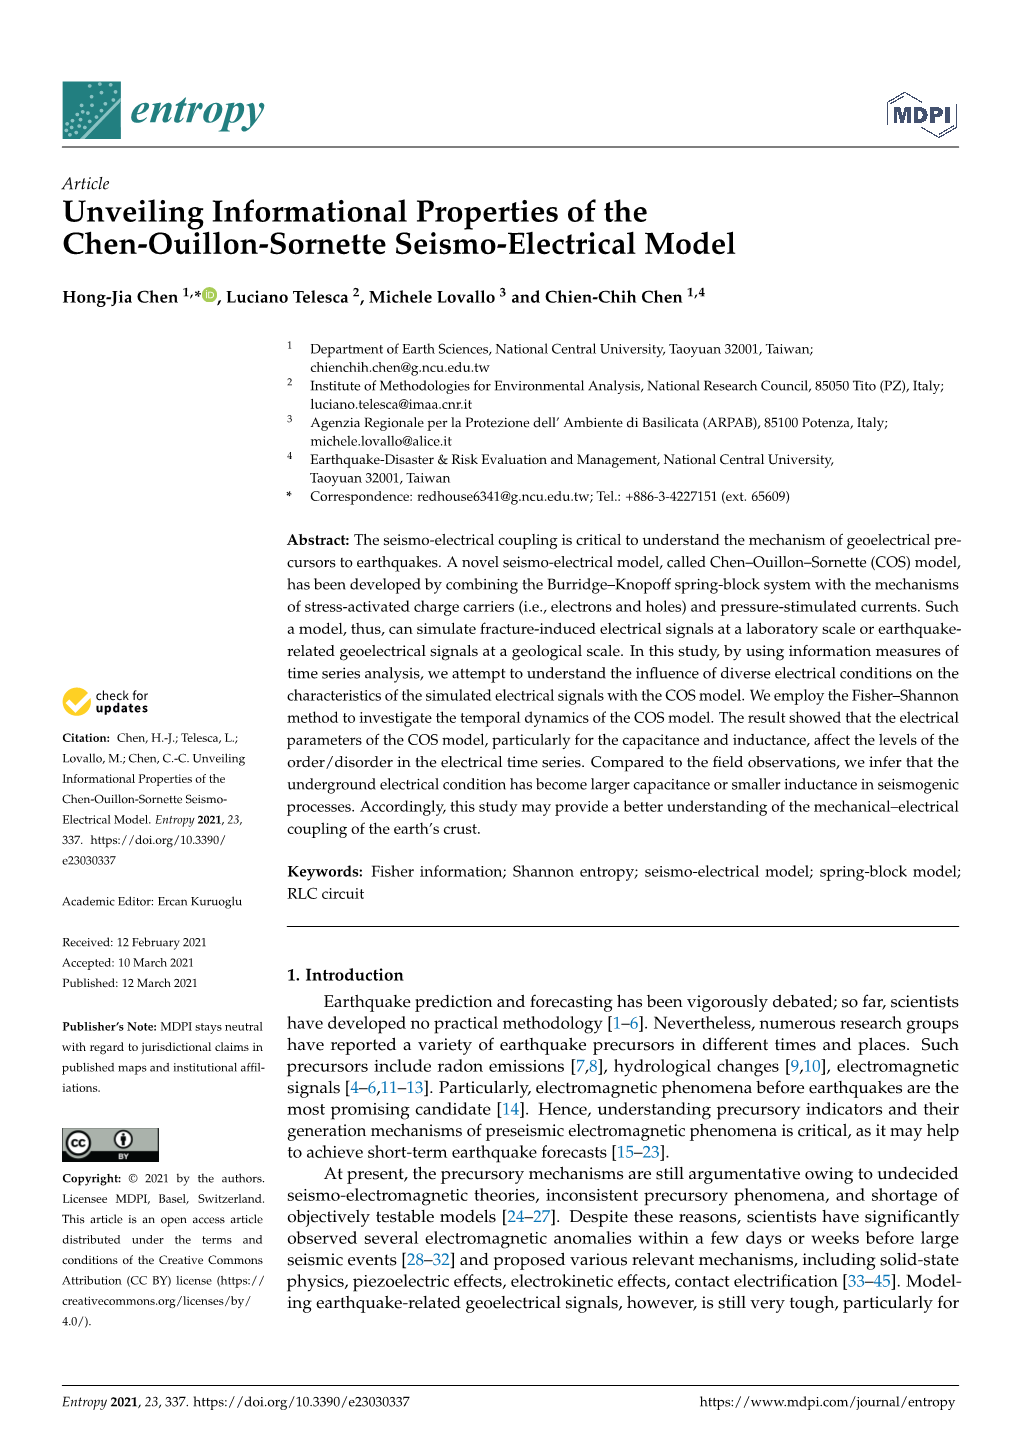 Unveiling Informational Properties of the Chen-Ouillon-Sornette Seismo-Electrical Model